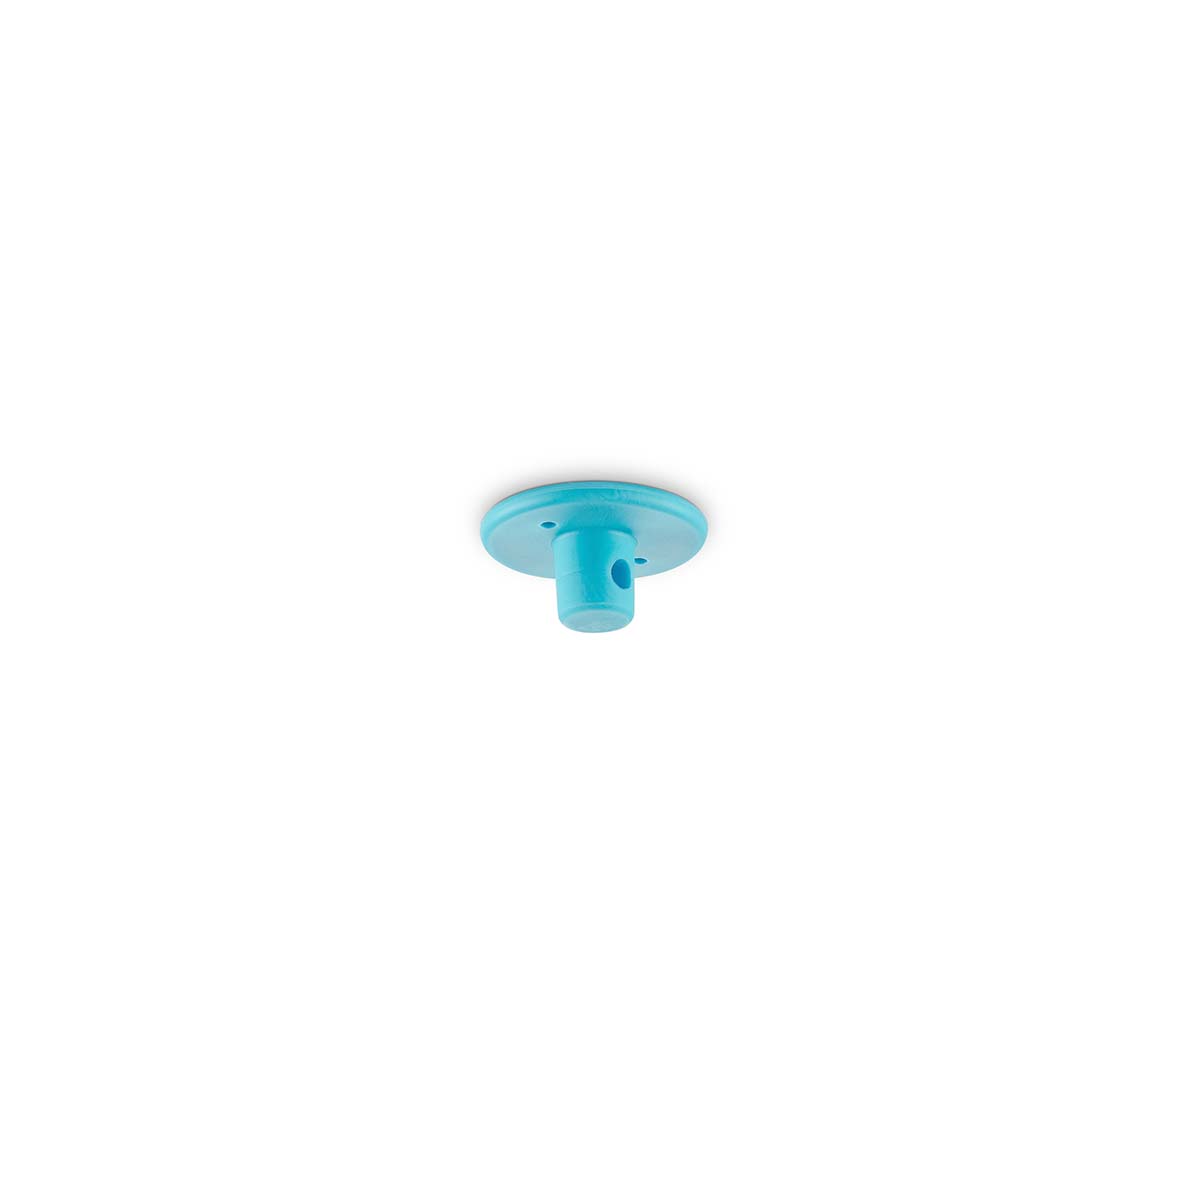 Tangla lighting - TLHG003LBL - Silicone cable hanger - mix and match - light blue